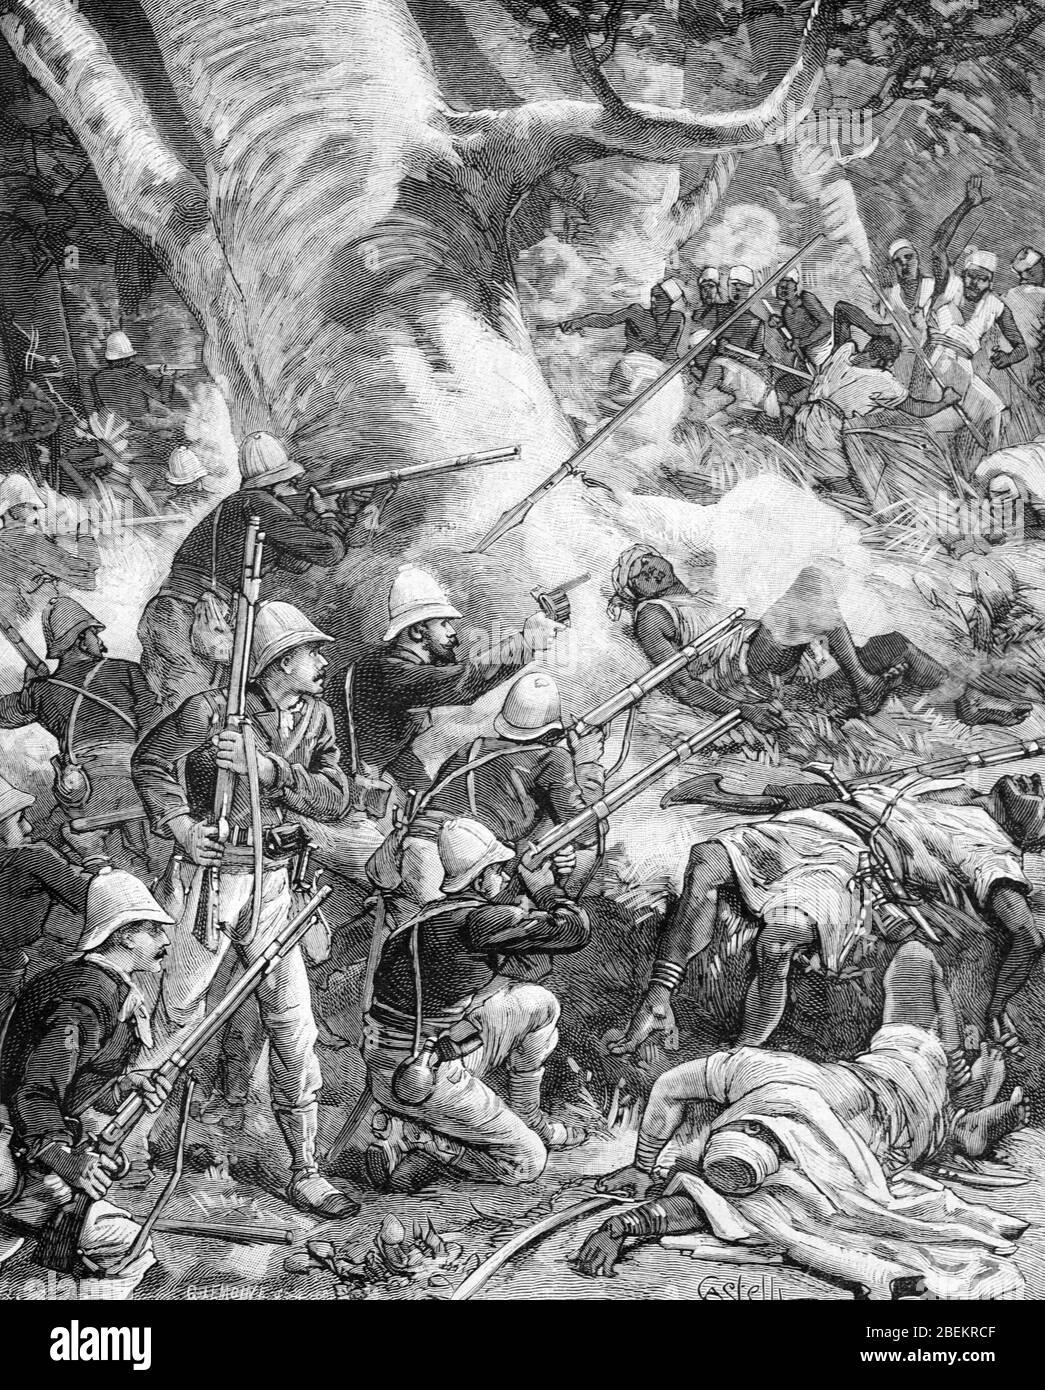 French General Joseph Gallieni (1849-1916) Leading French Troops into Battle during the French Colonial Wars in Senegal & Mali (then French Sudan) 1887. Vintage or Old Illustration or Engraving 1887 Stock Photo